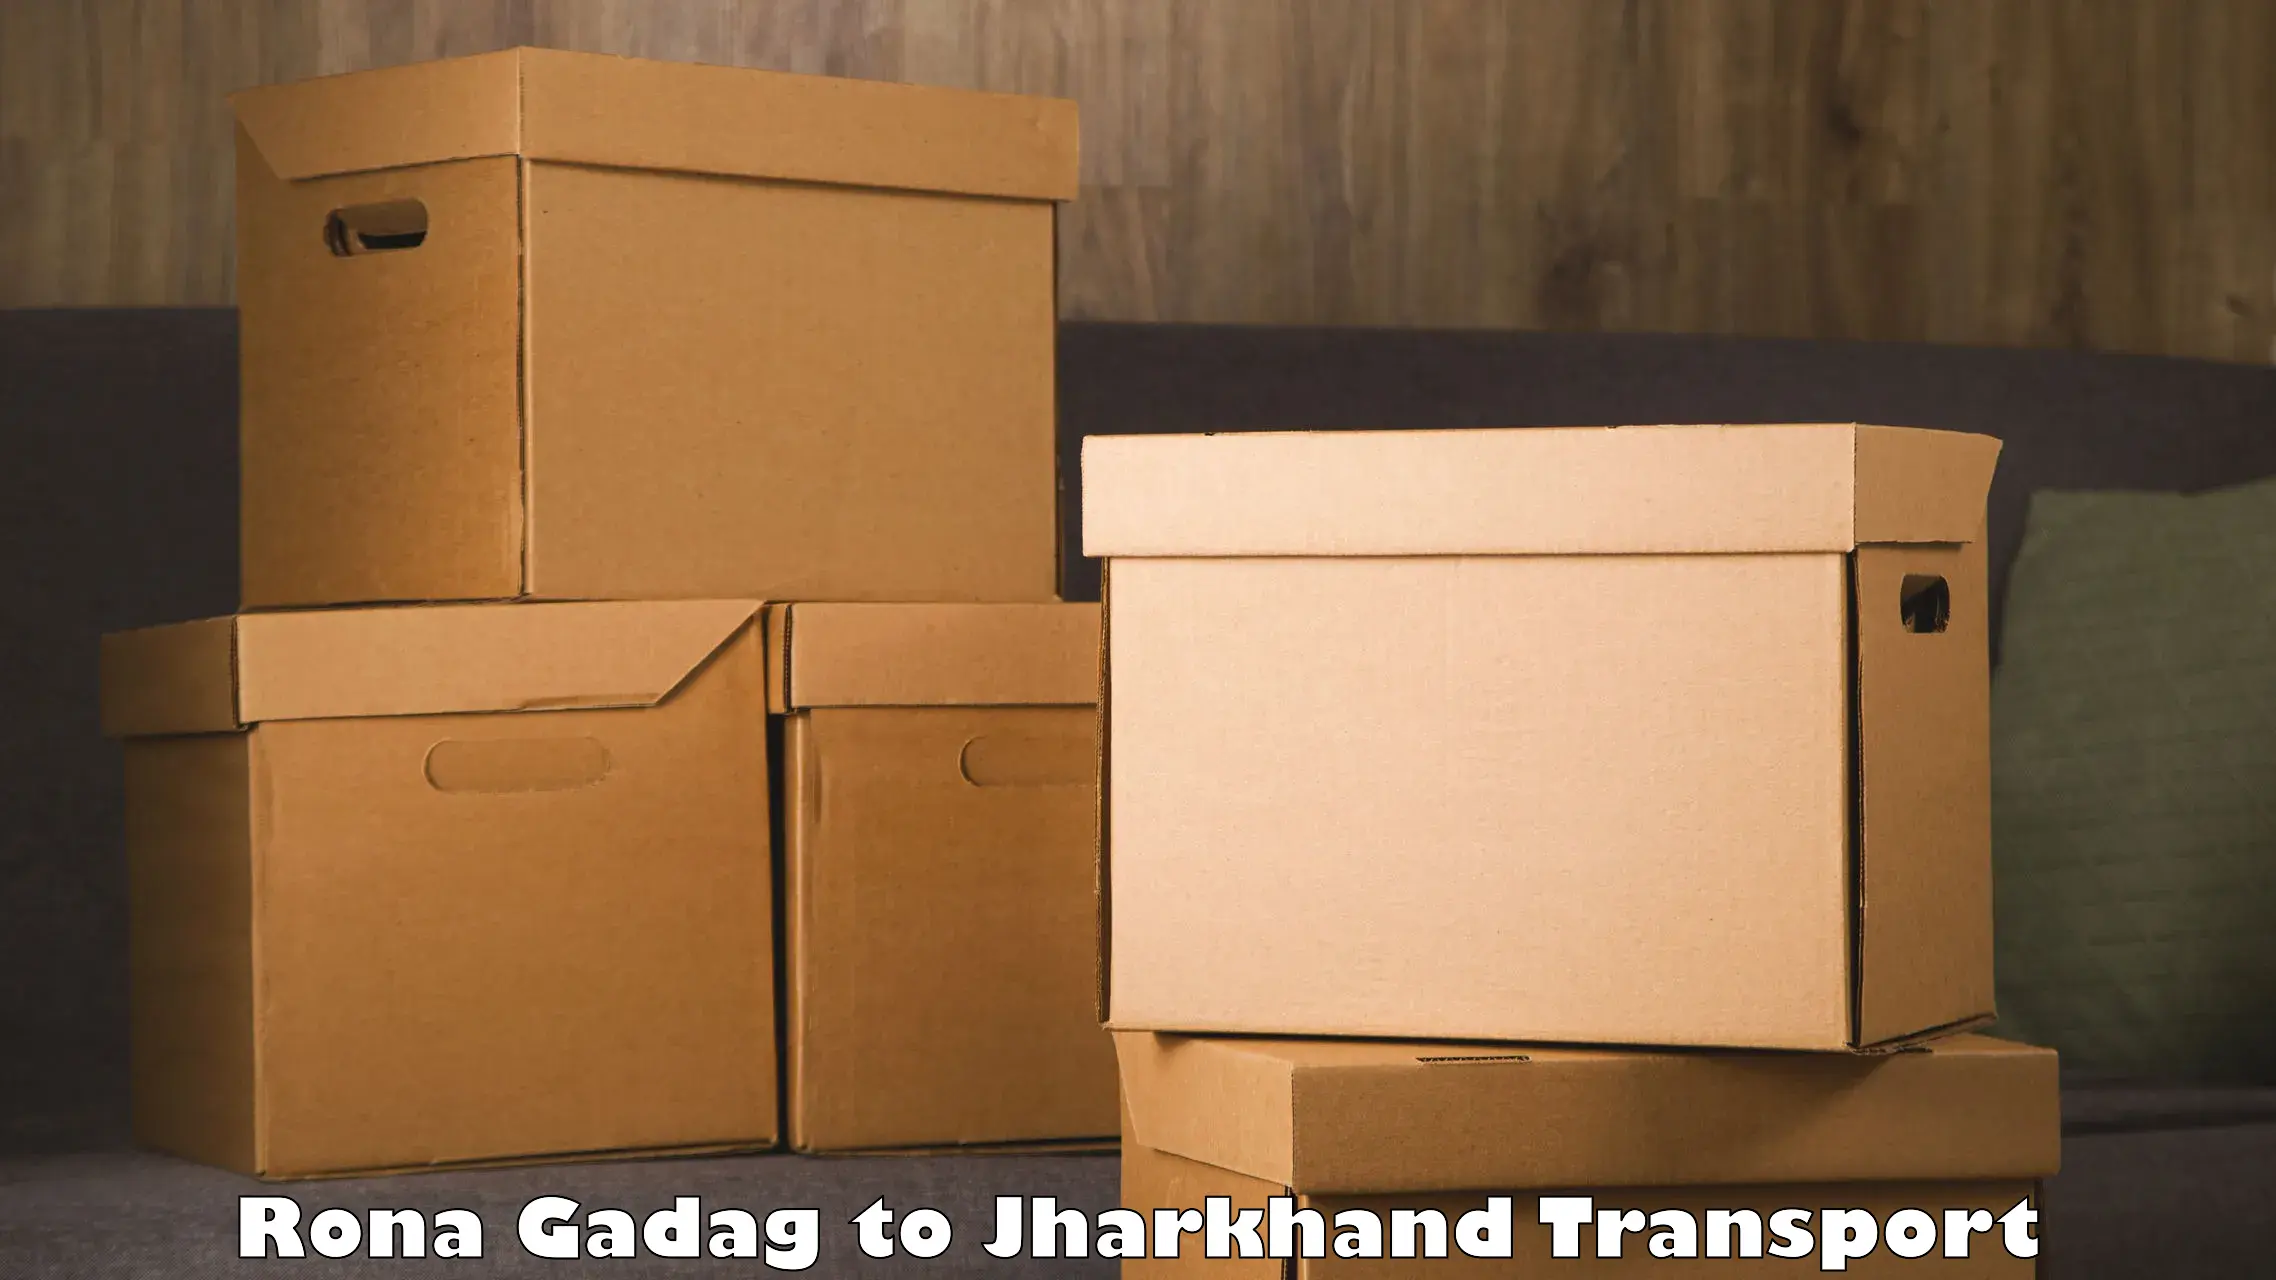 Part load transport service in India Rona Gadag to Garhwa